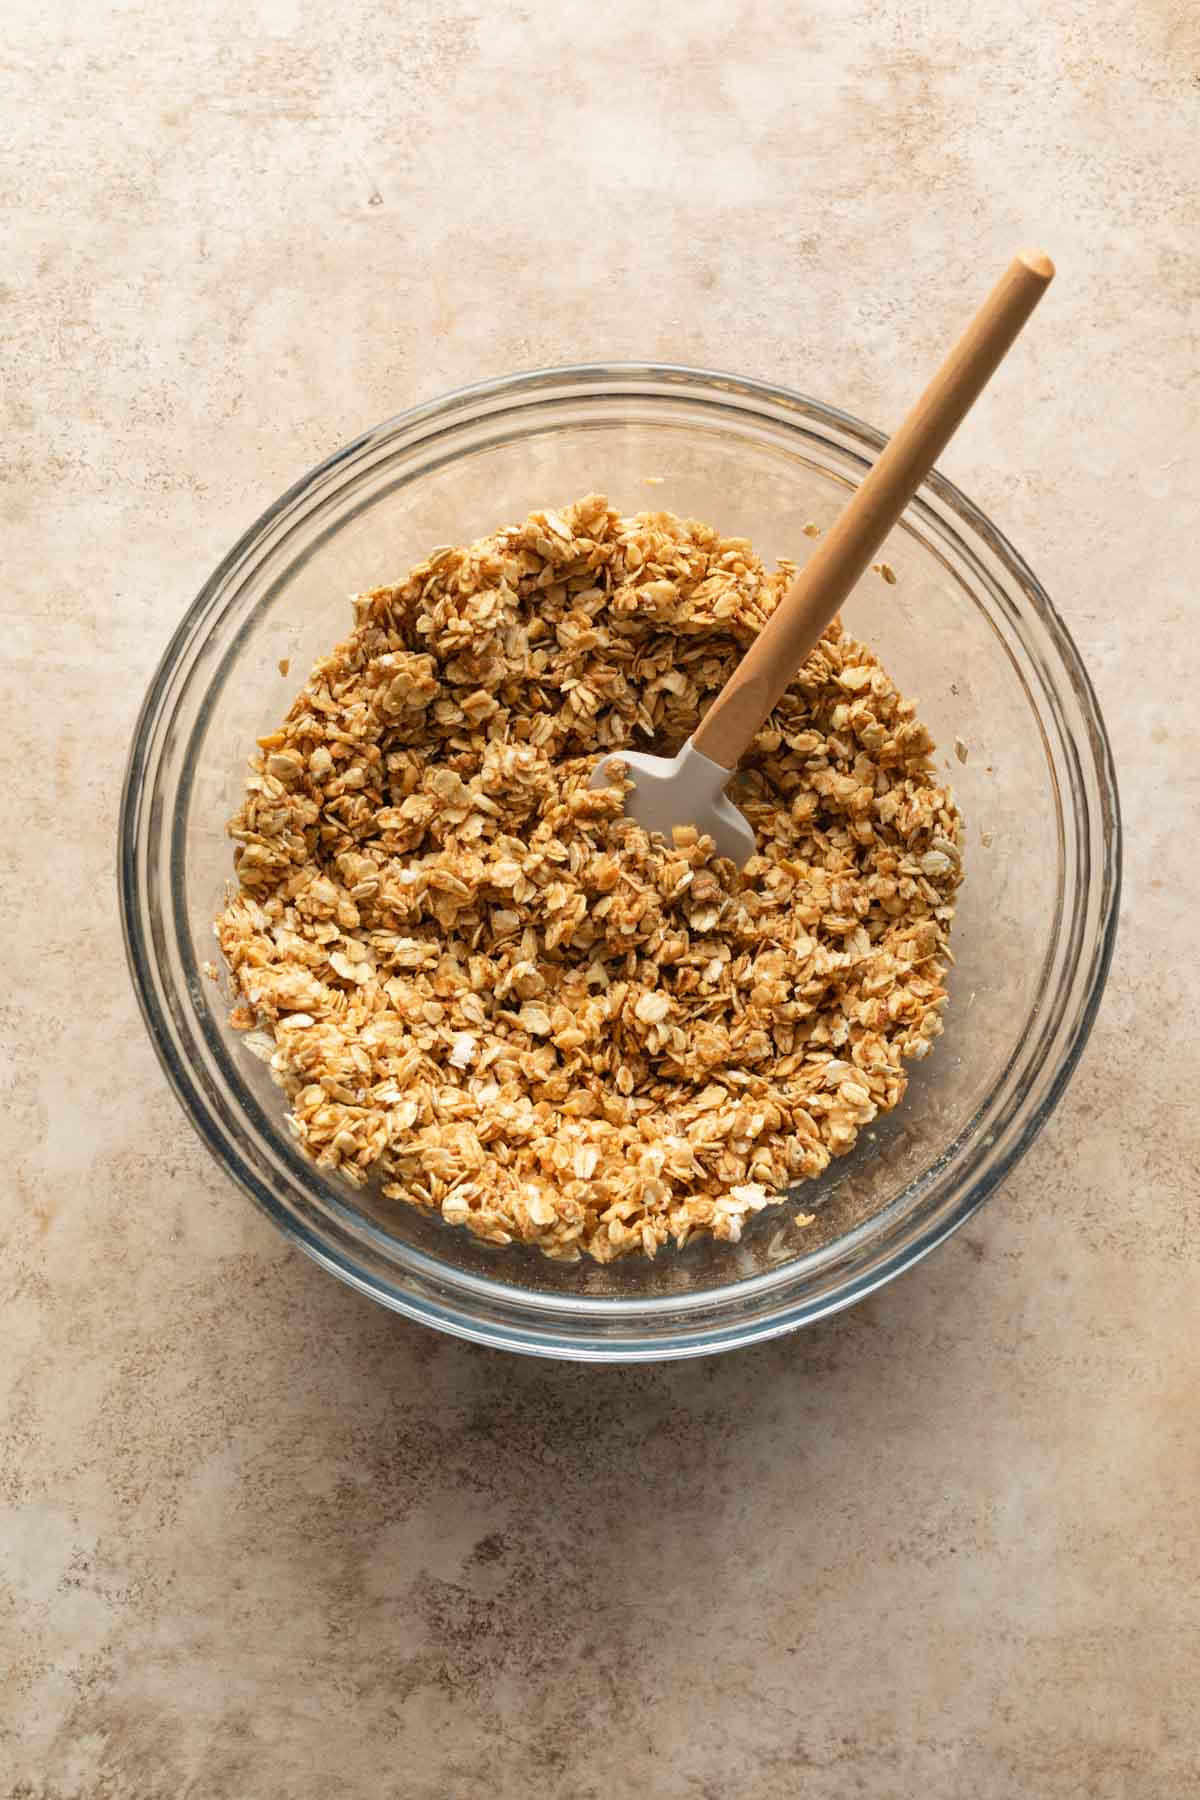 Granola mixed together in a glass bowl with a spatula.